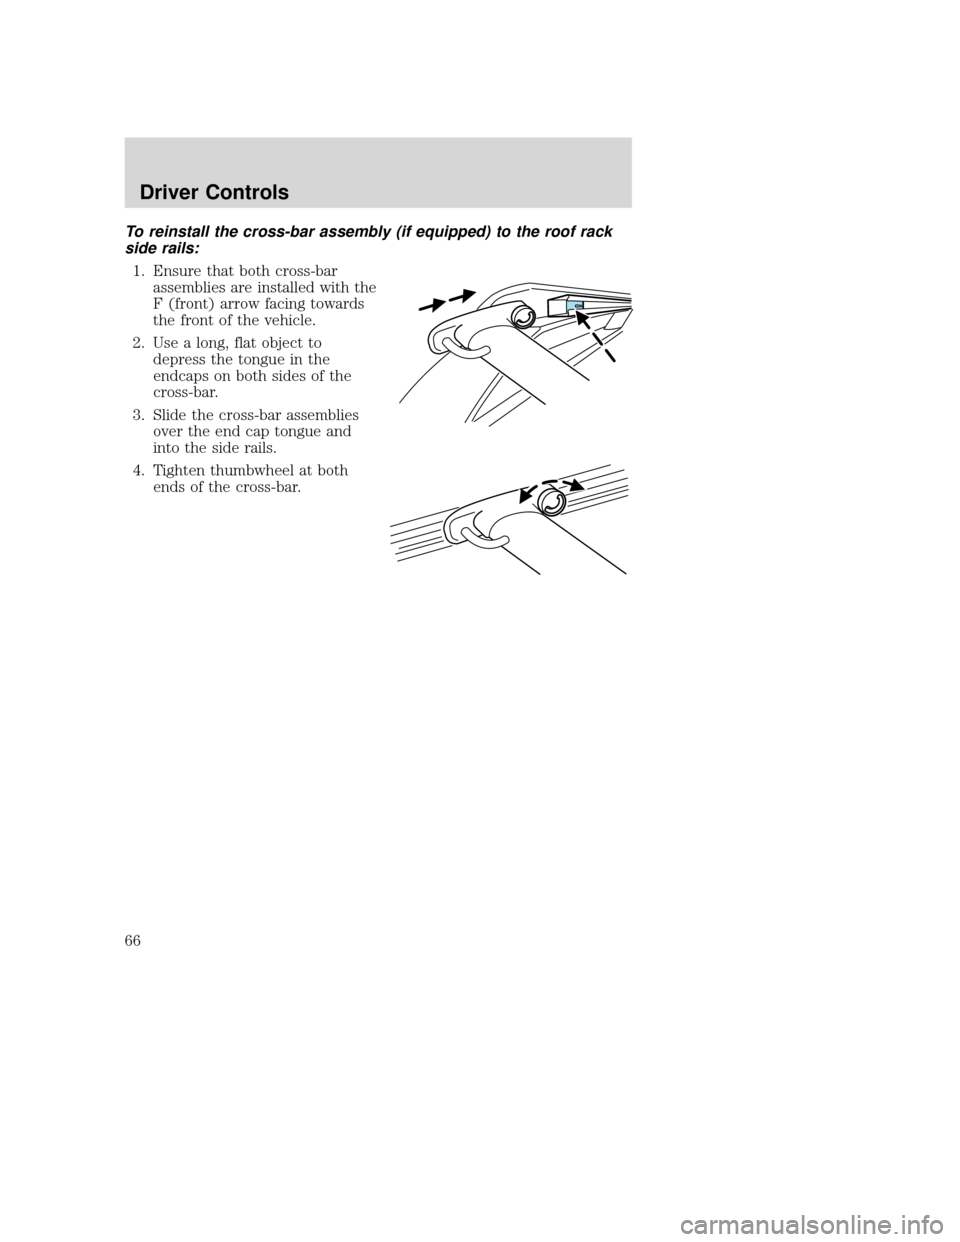 MAZDA MODEL TRIBUTE 2009  Owners Manual (in English) To reinstall the cross-bar assembly (if equipped) to the roof rack
side rails:1. Ensure that both cross-bar assemblies are installed with the
F (front) arrow facing towards
the front of the vehicle.
2